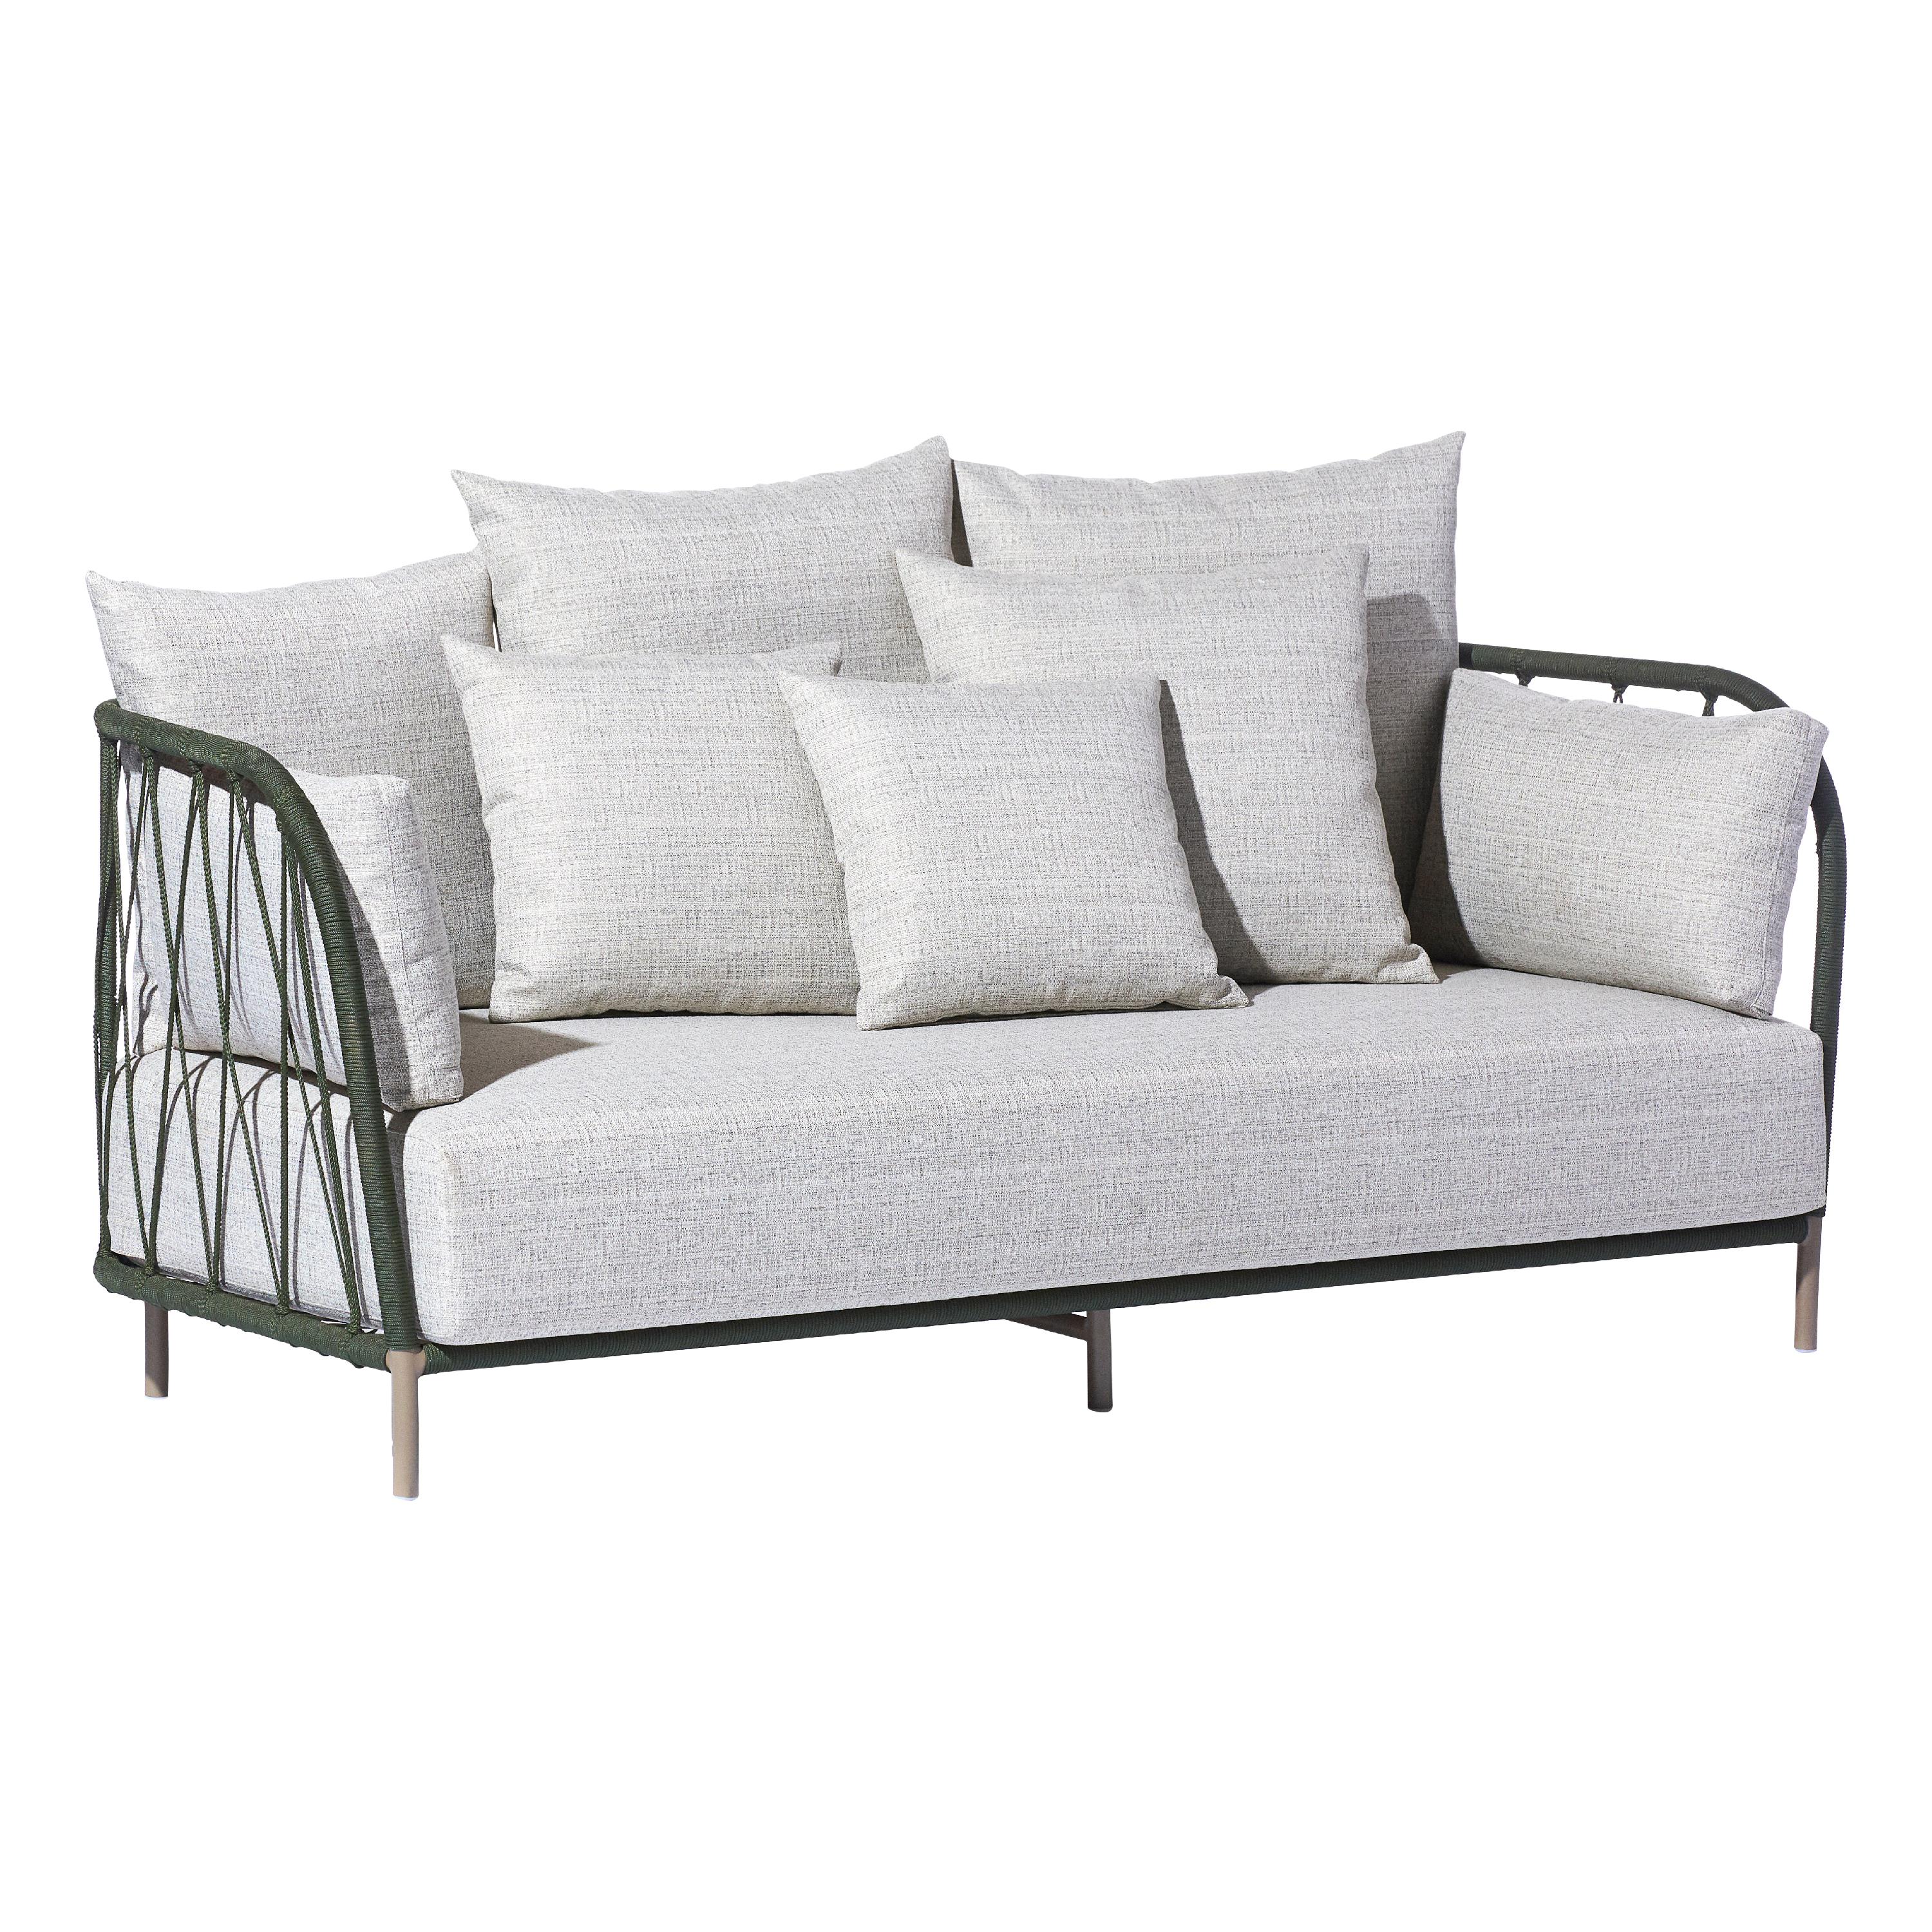 Contemporary Outdoor Sofa, Aluminum with Nautical Rope Pattern, Bask For Sale